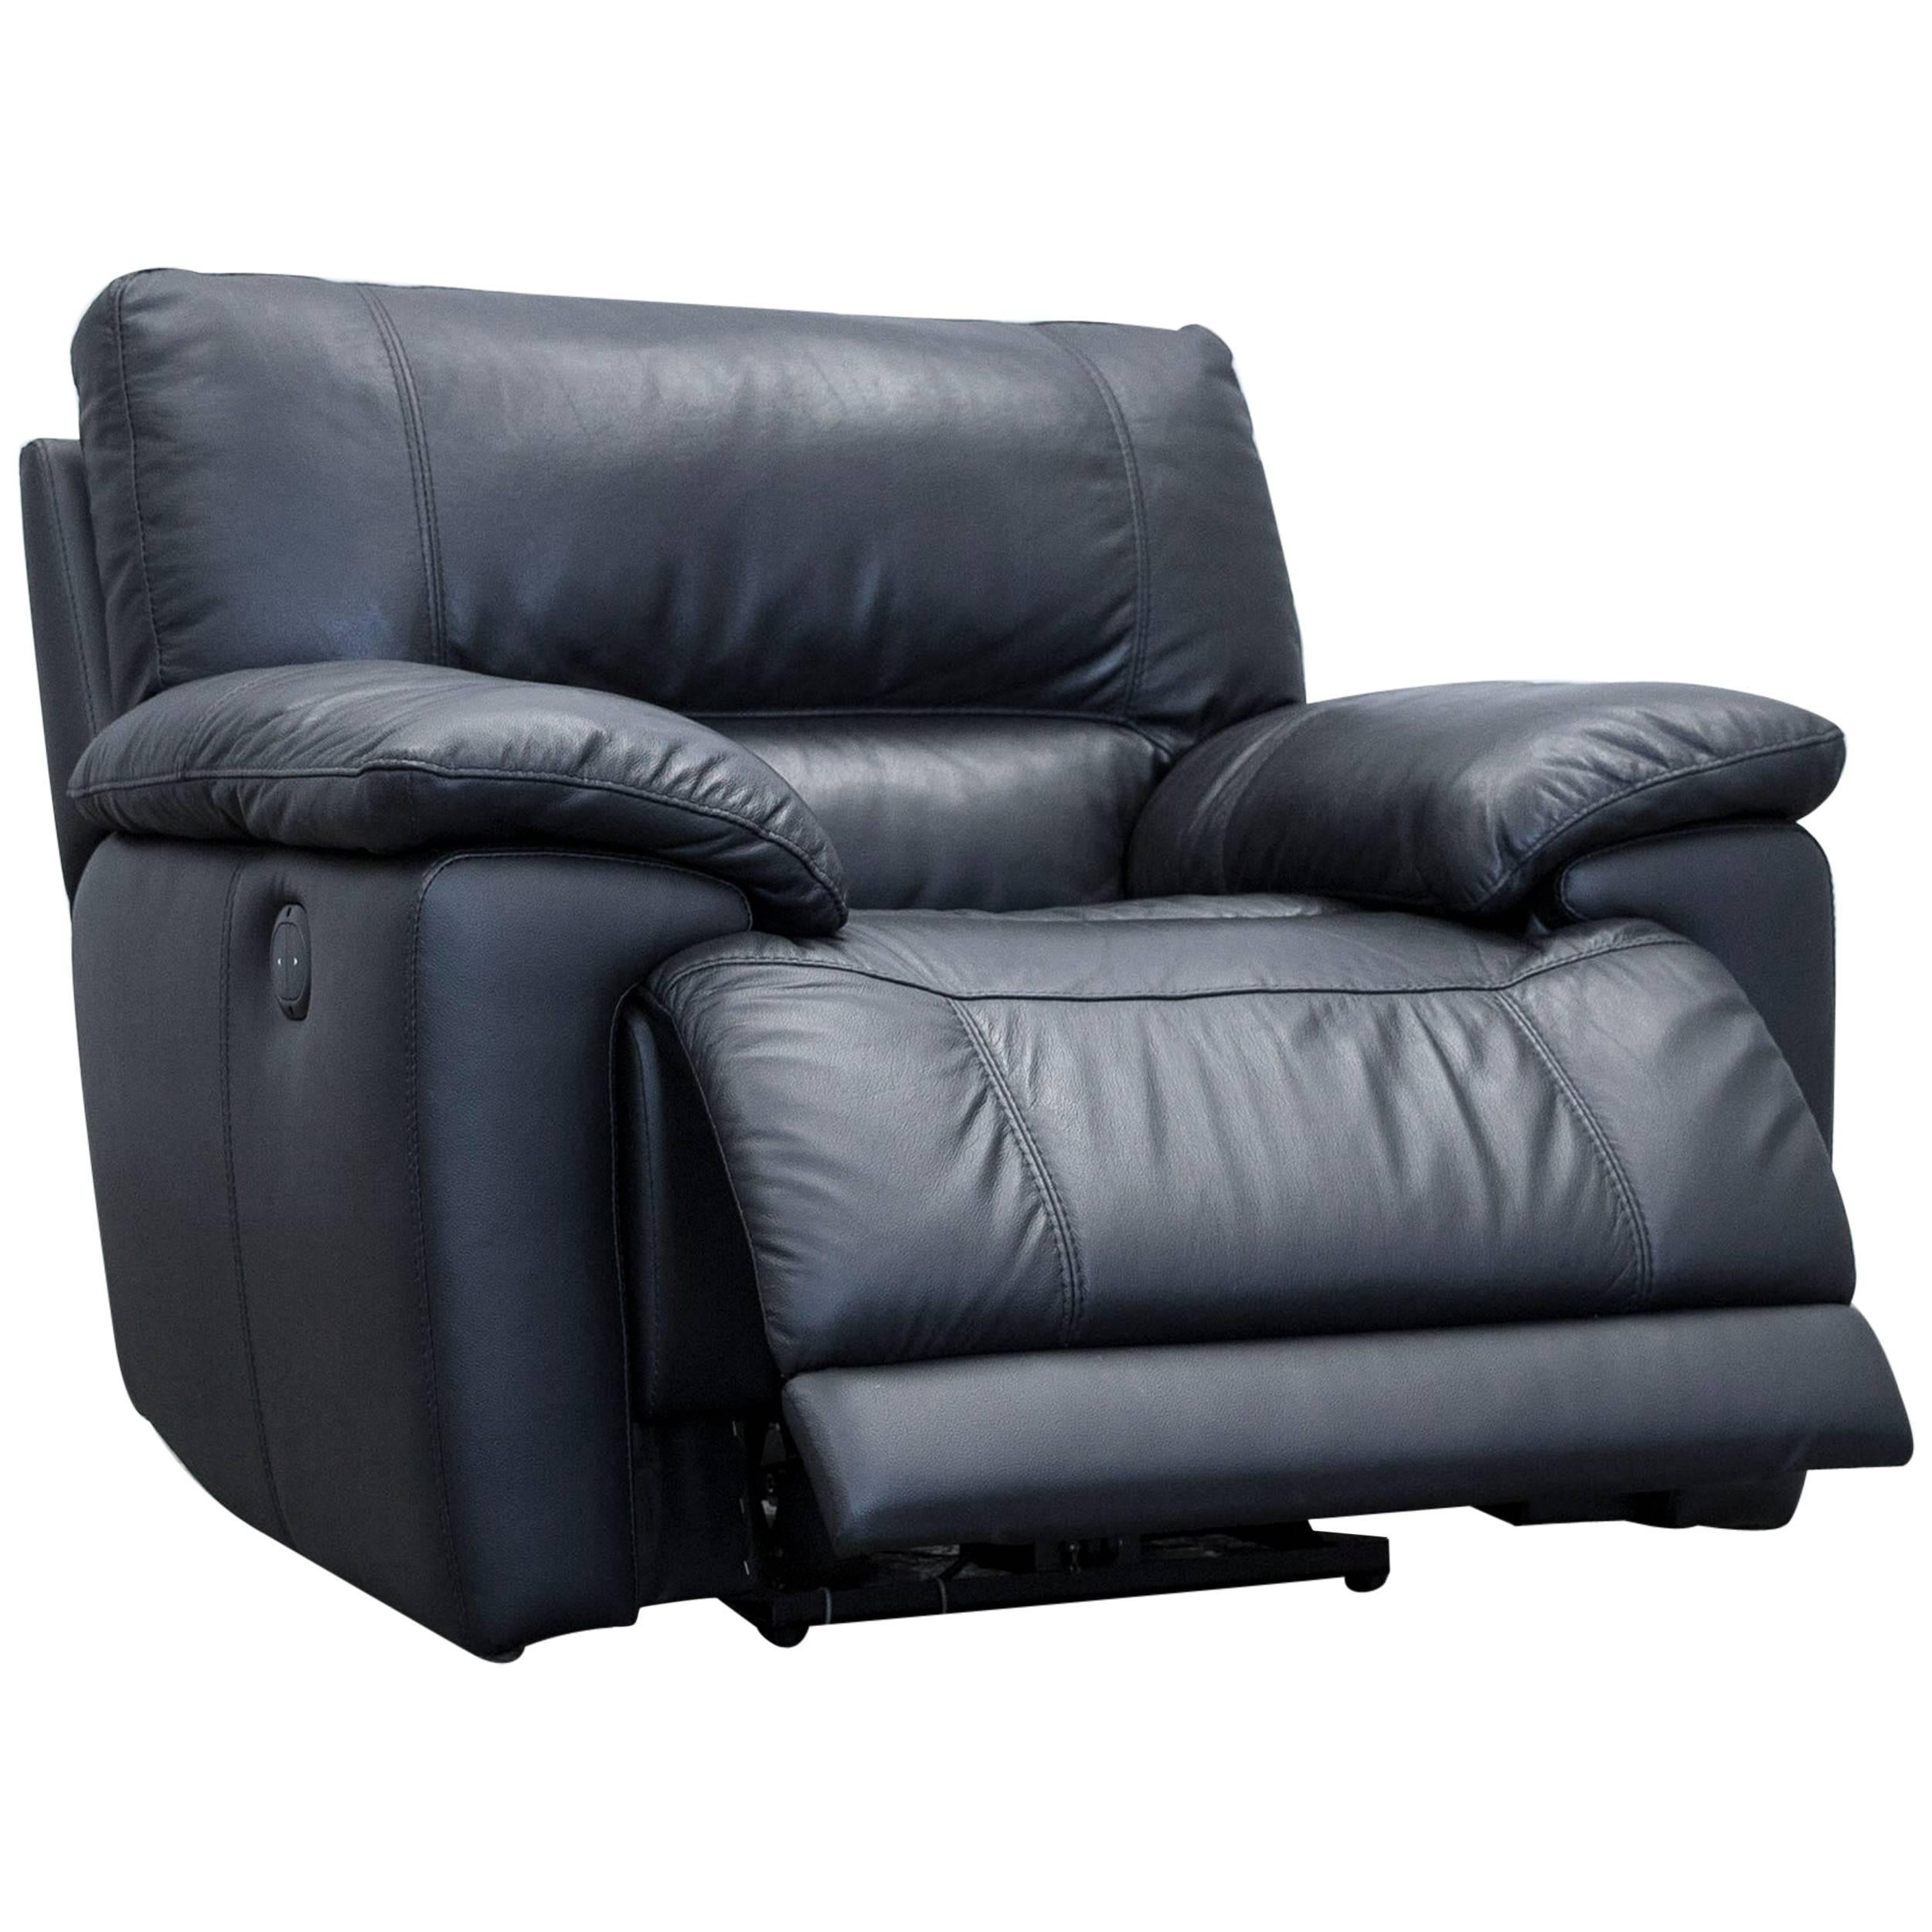 Designer Armchair Leather Black One-Seat Couch Electrical Function Modern Relax For Sale